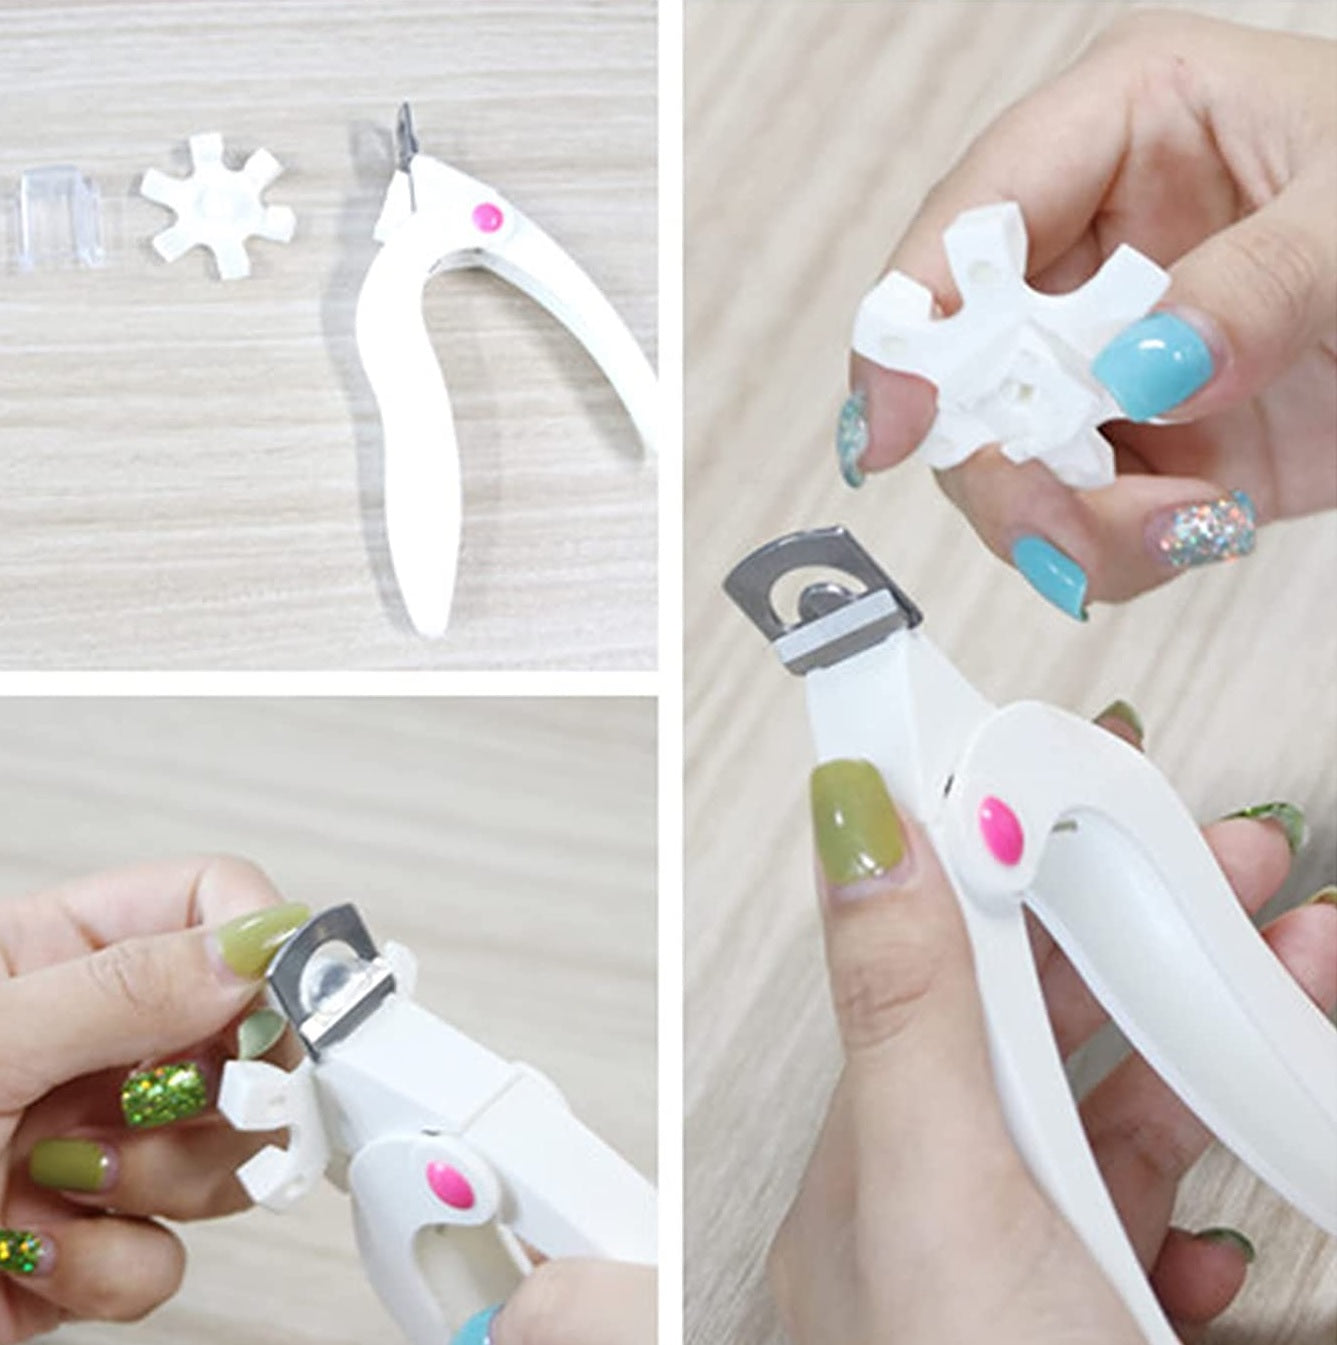 Stainless Steel Nail Tip Cutter, Nail Clippers for Acrylic Nails, French Manicure Tool, False Tips Trimmer,